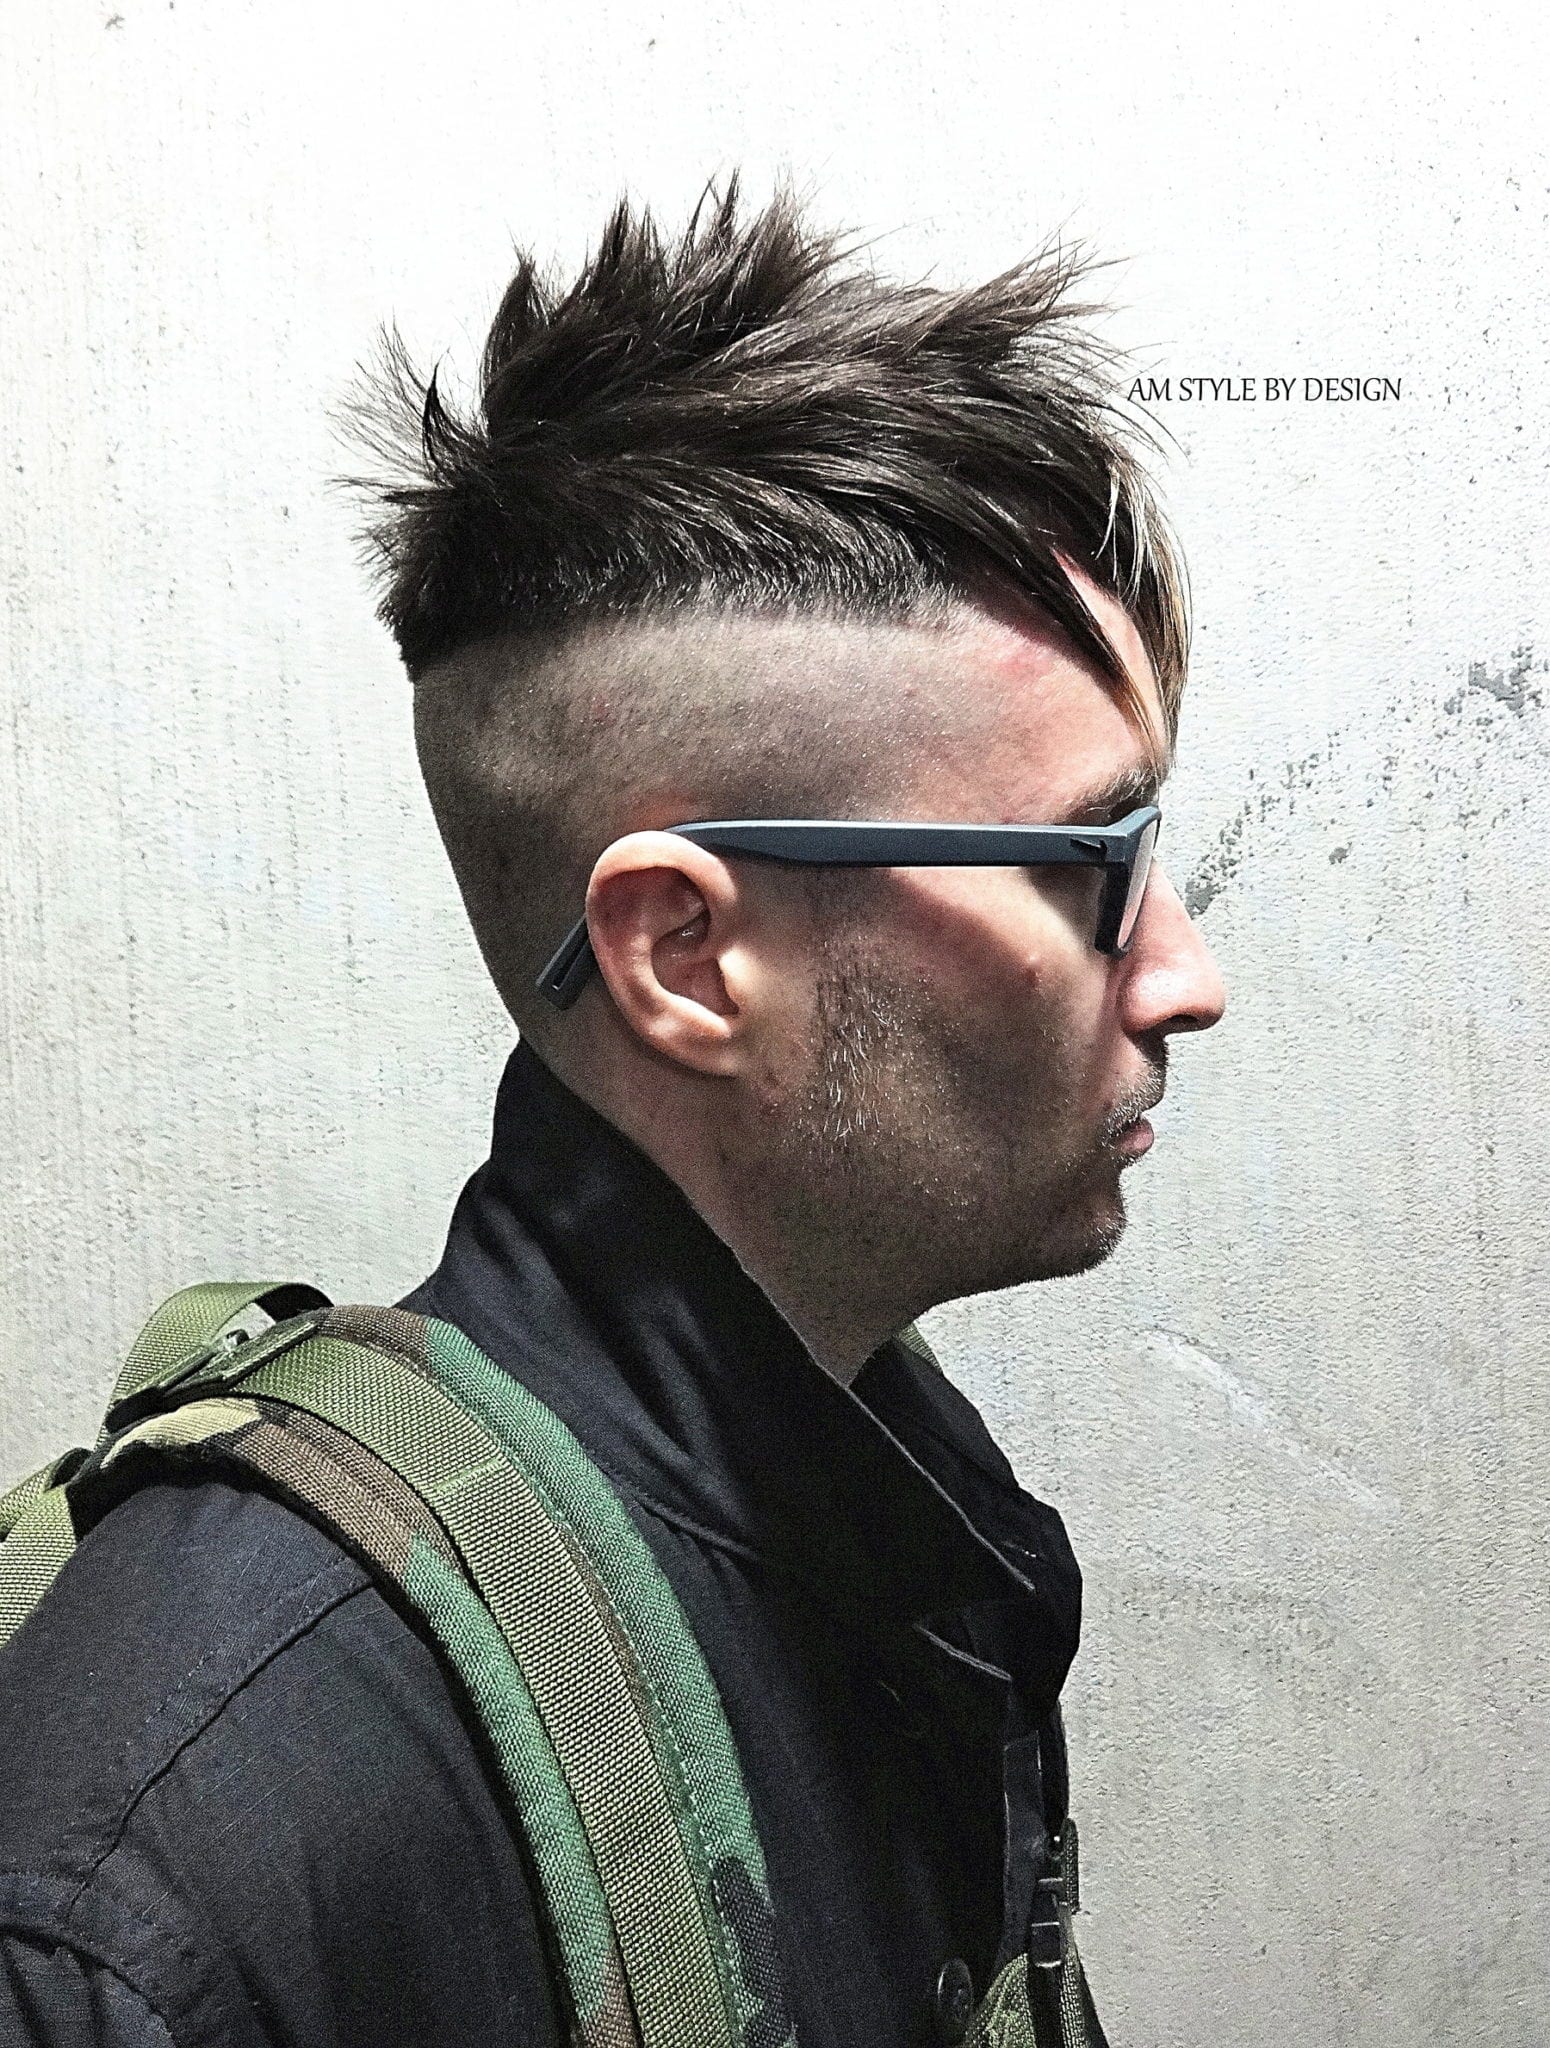 Punk Military Men's Haircut Collection - AM STYLE BY DESIGN